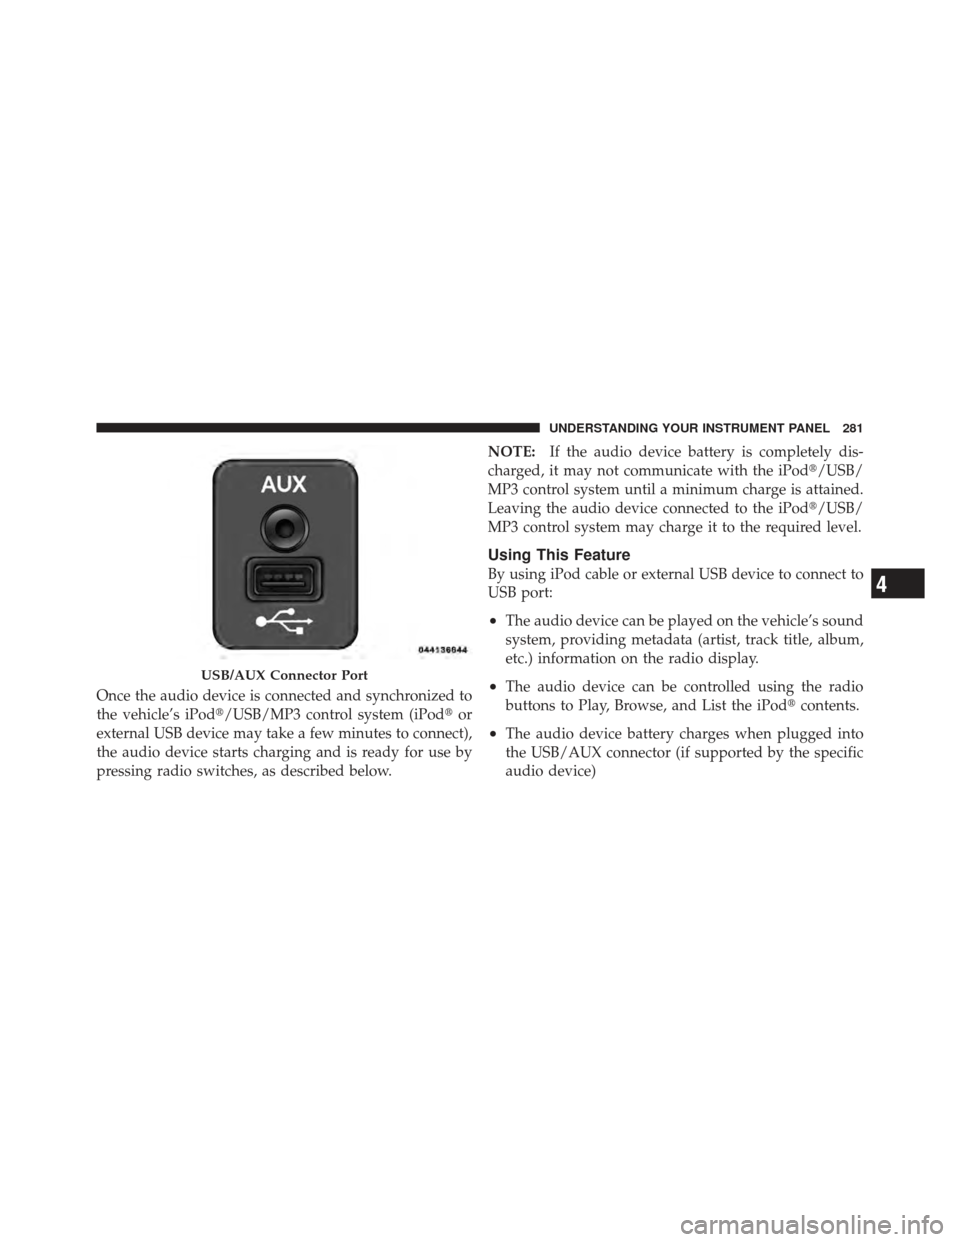 Ram 1500 2011  Owners Manual Once the audio device is connected and synchronized to
the vehicle’s iPod/USB/MP3 control system (iPodor
external USB device may take a few minutes to connect),
the audio device starts charging an